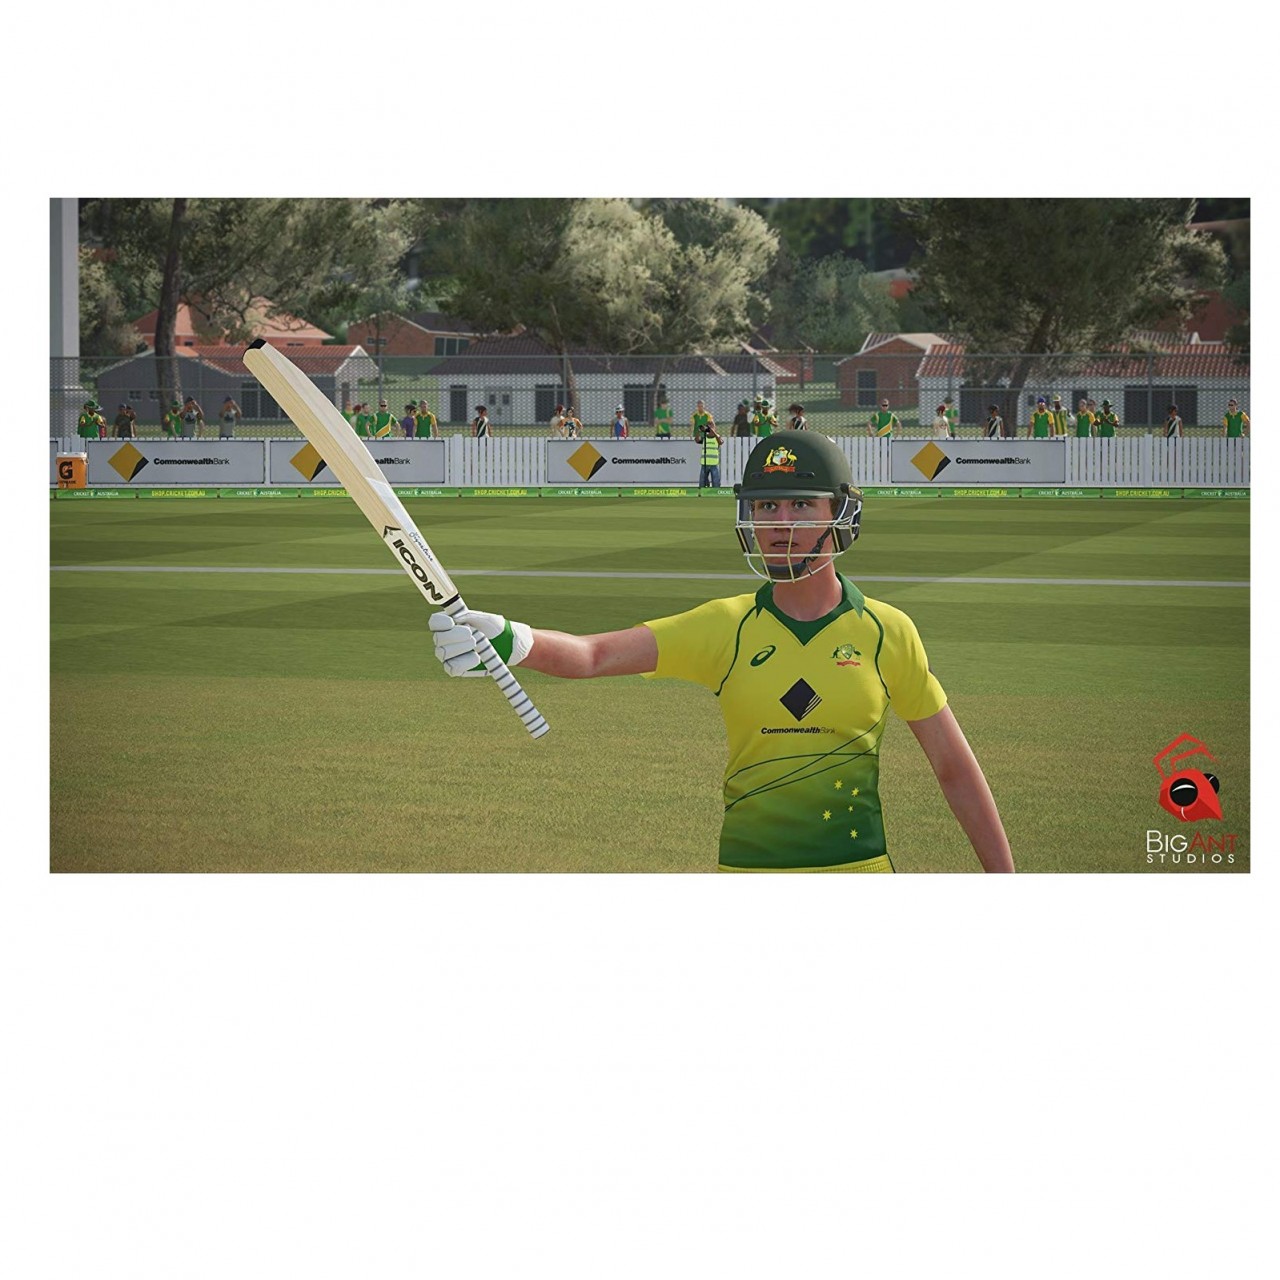 11. PS4 Ashes Cricket Game – Stadiums Featured in Ashes 2017/18 – Features Cricket Academy